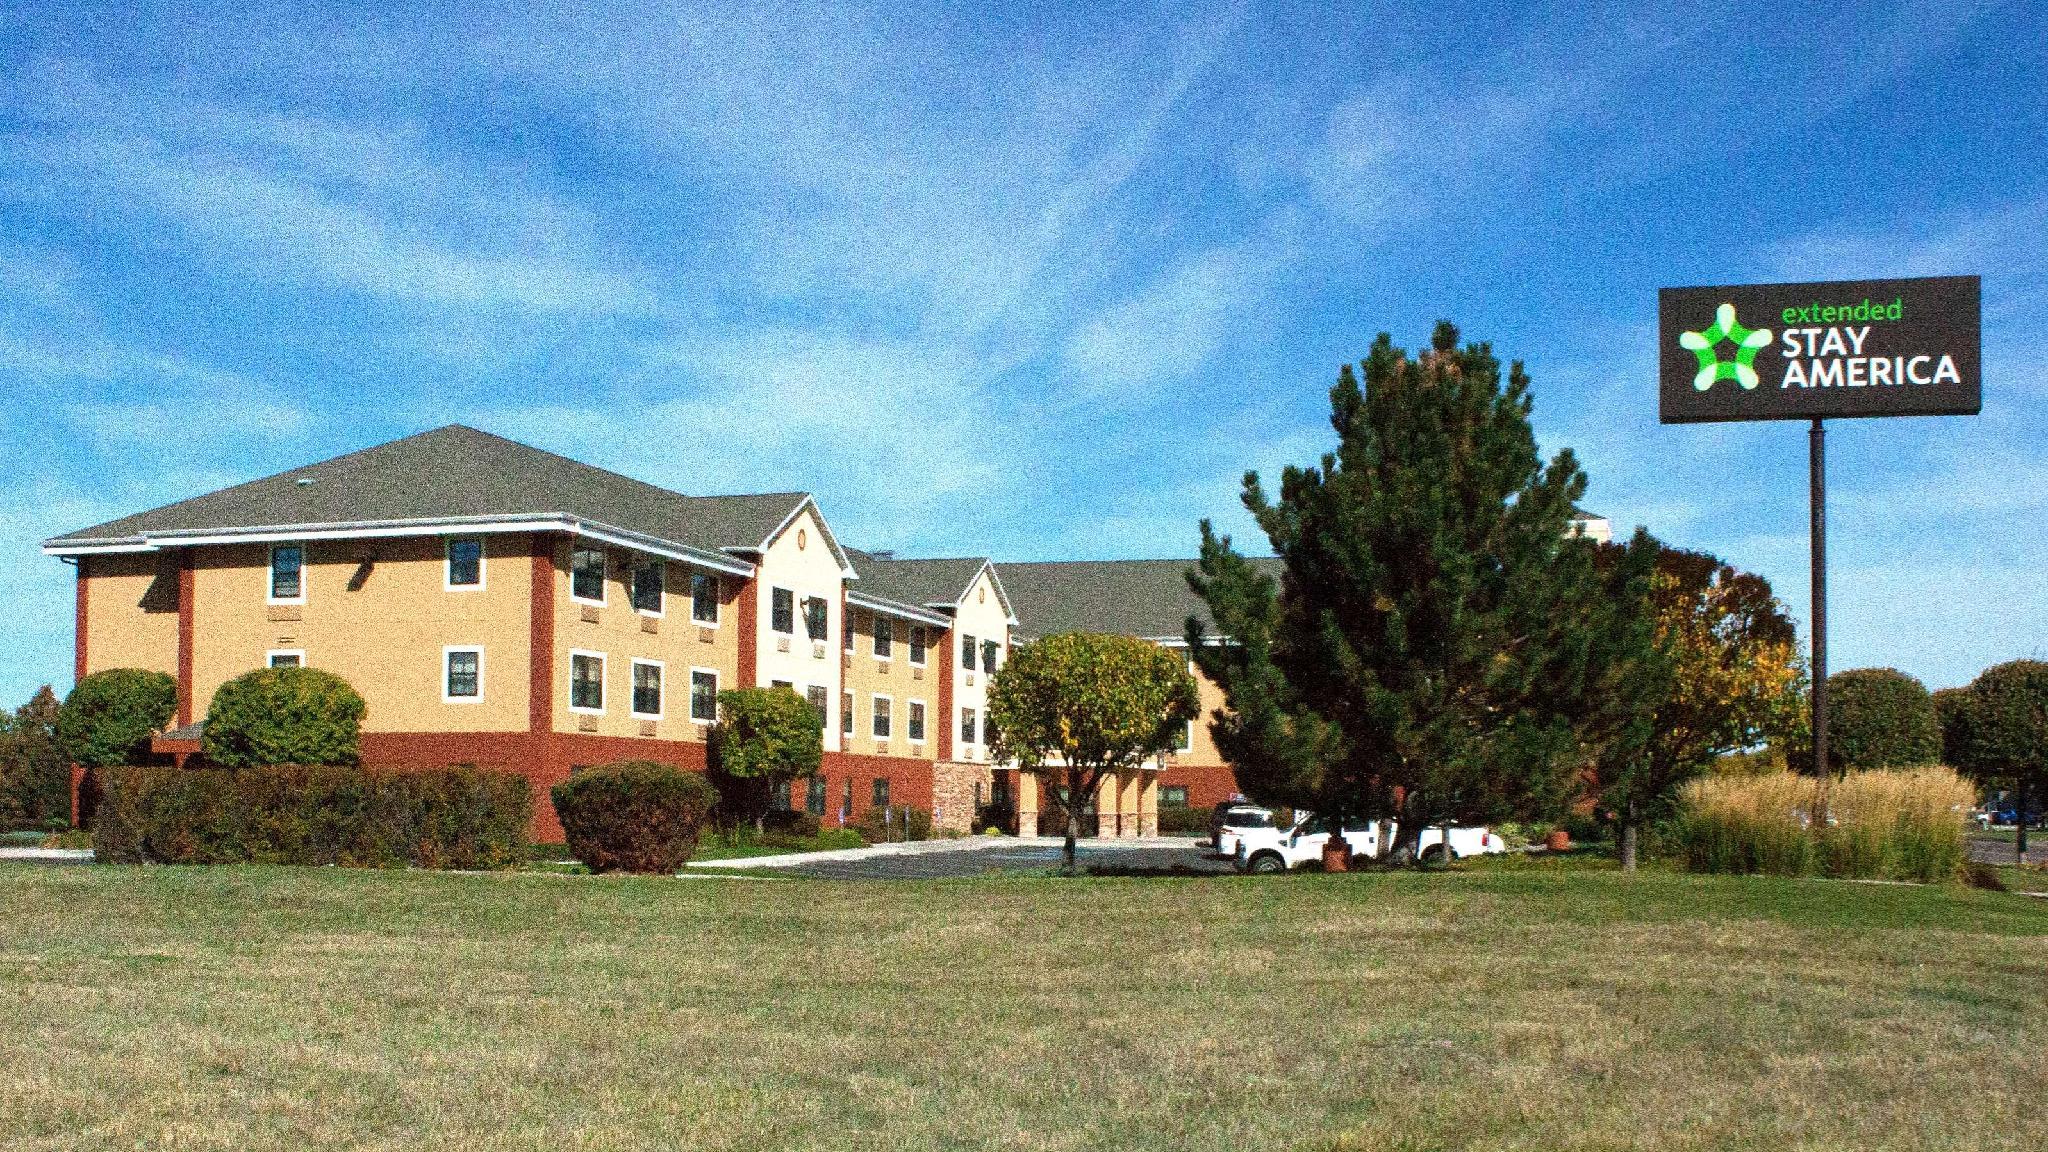 Extended Stay America - Great Falls - Missouri Riv